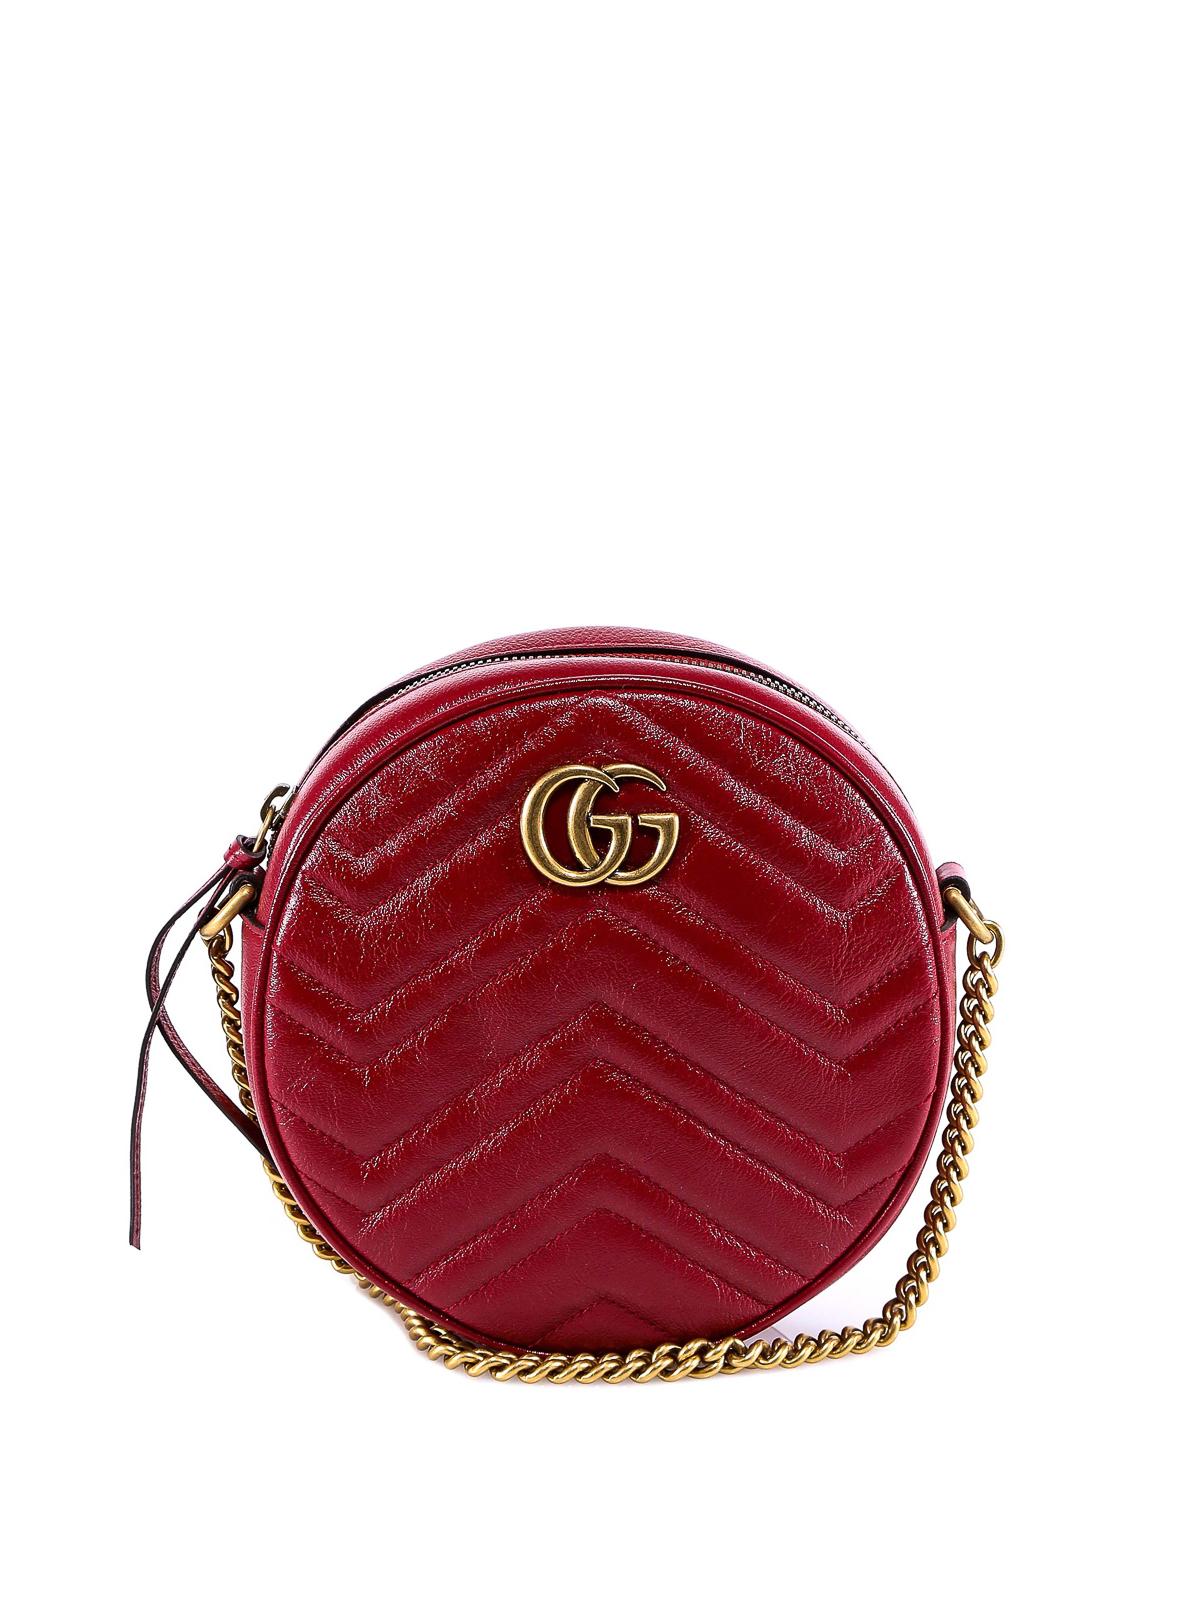 Gucci Leather GG Marmont Round Cross Body Bag in Red - Lyst